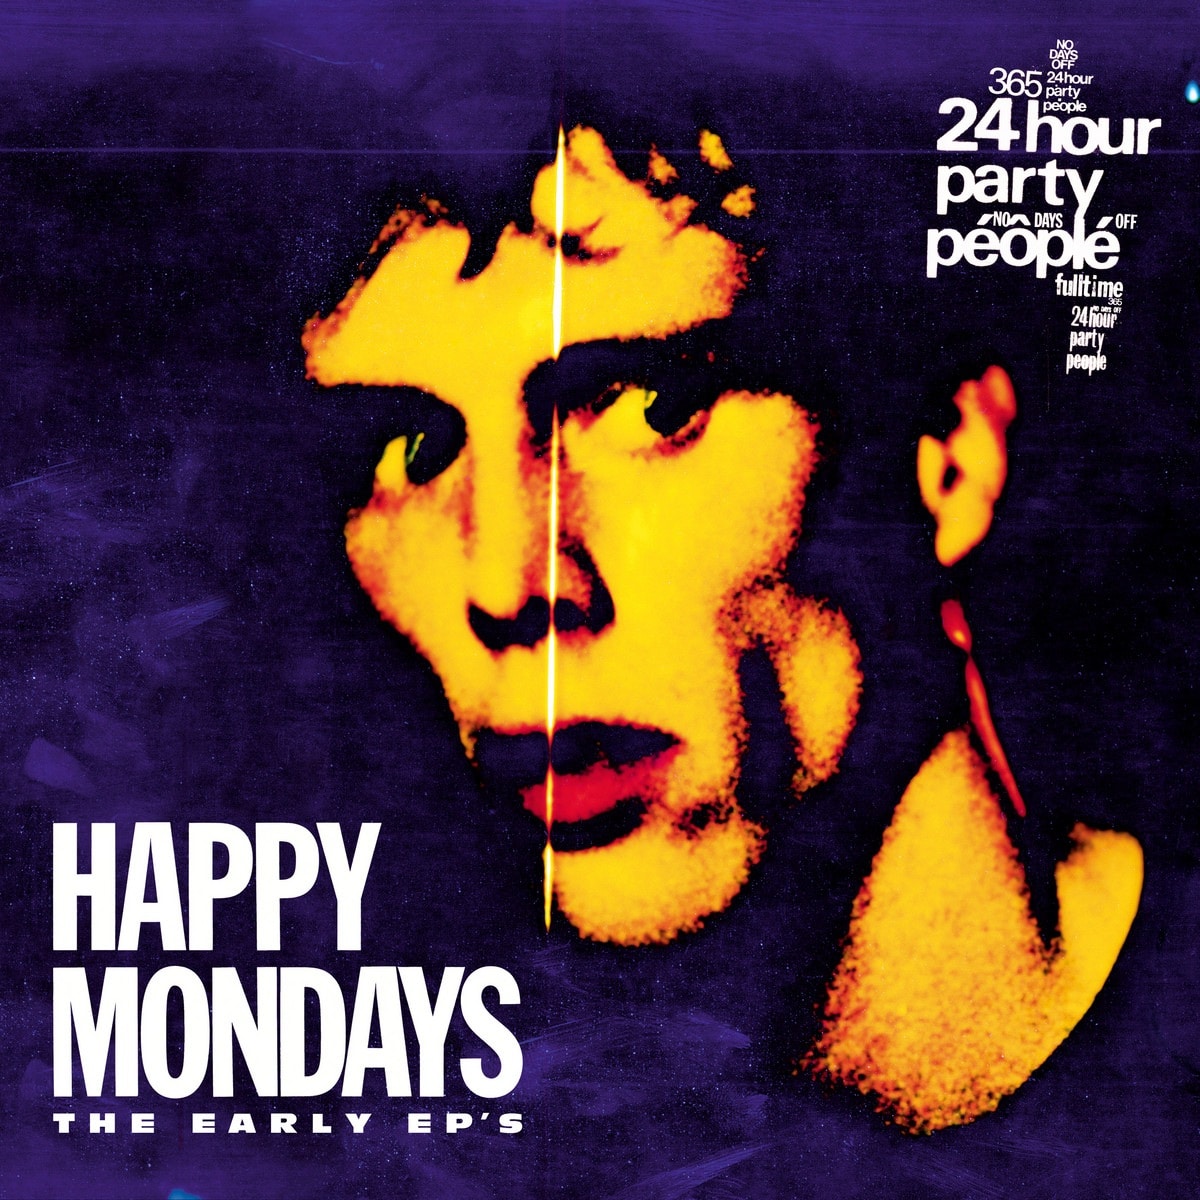 Happy Mondays - the Early EP's - LMS5521302 - LONDON MUSIC STREAM